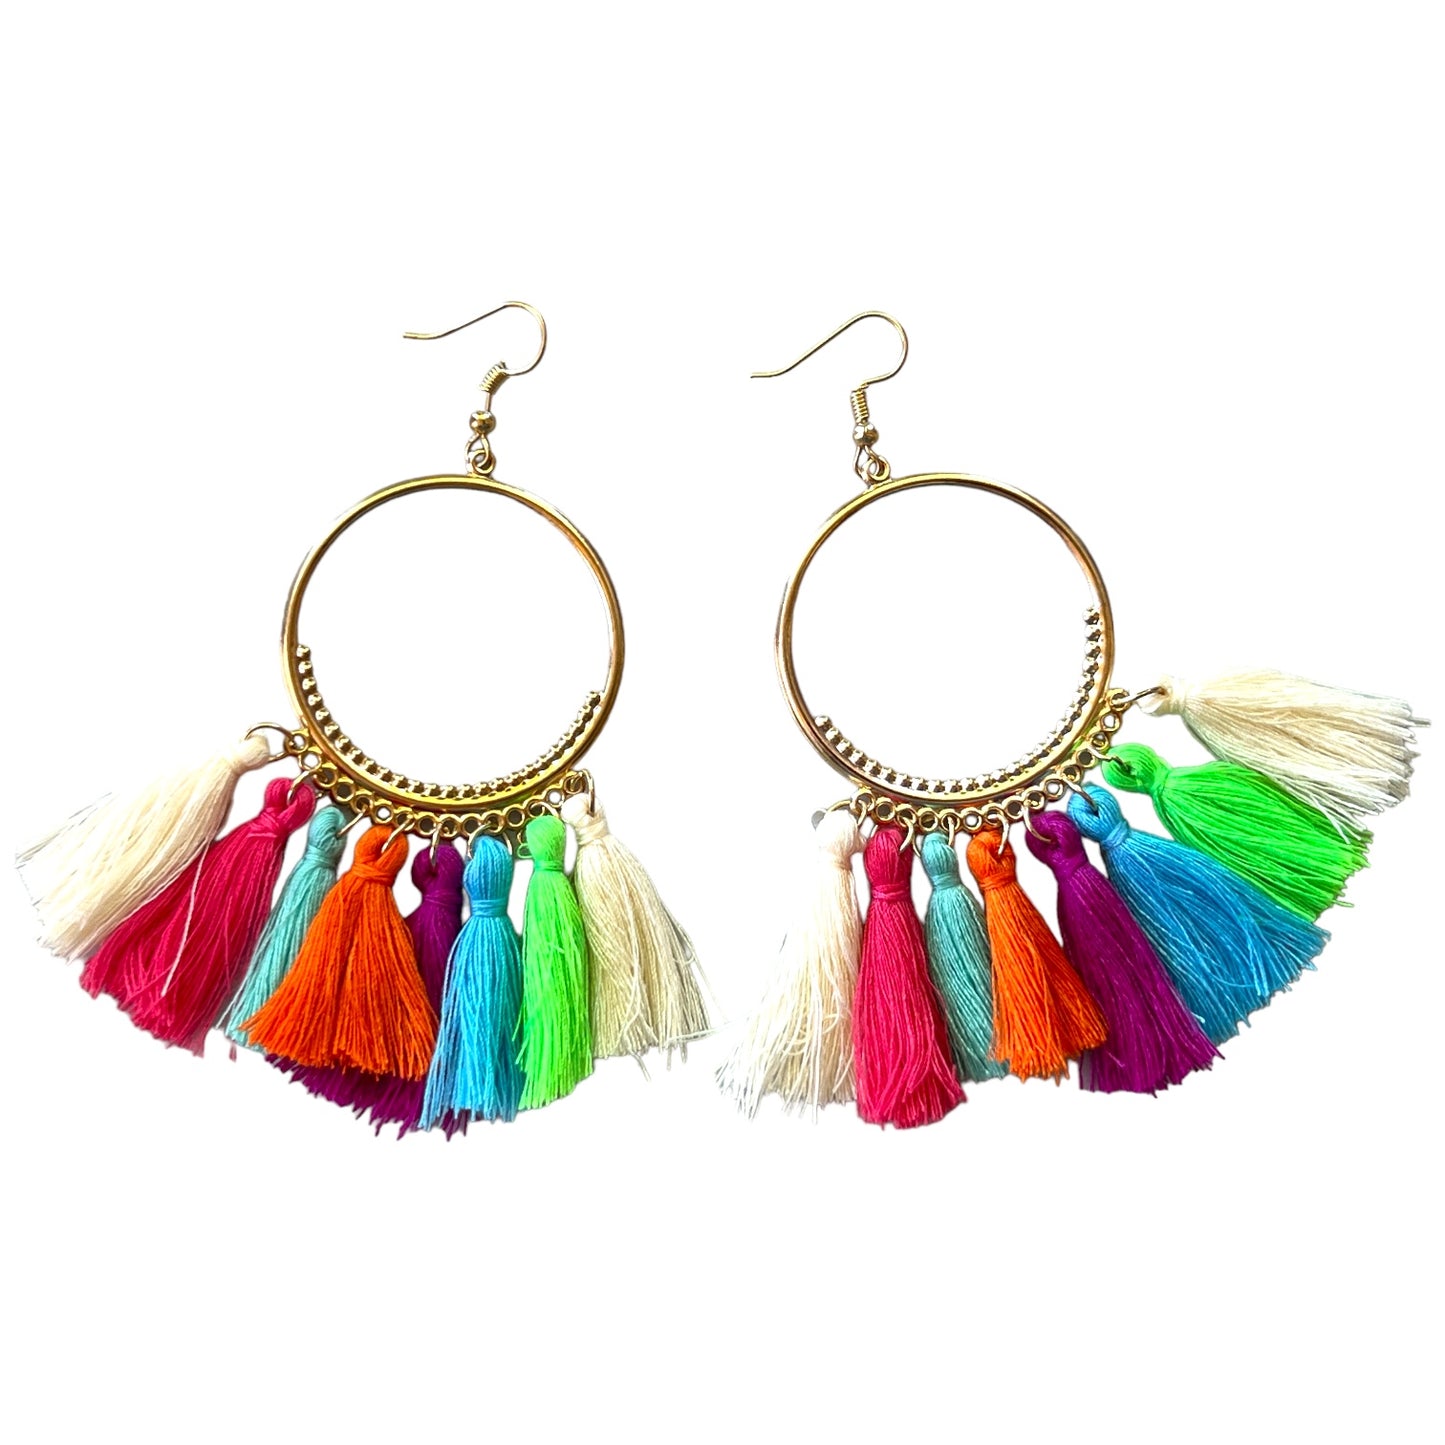 Multi-Colored String Tassel Earrings: Vibrant & Playful Accessories